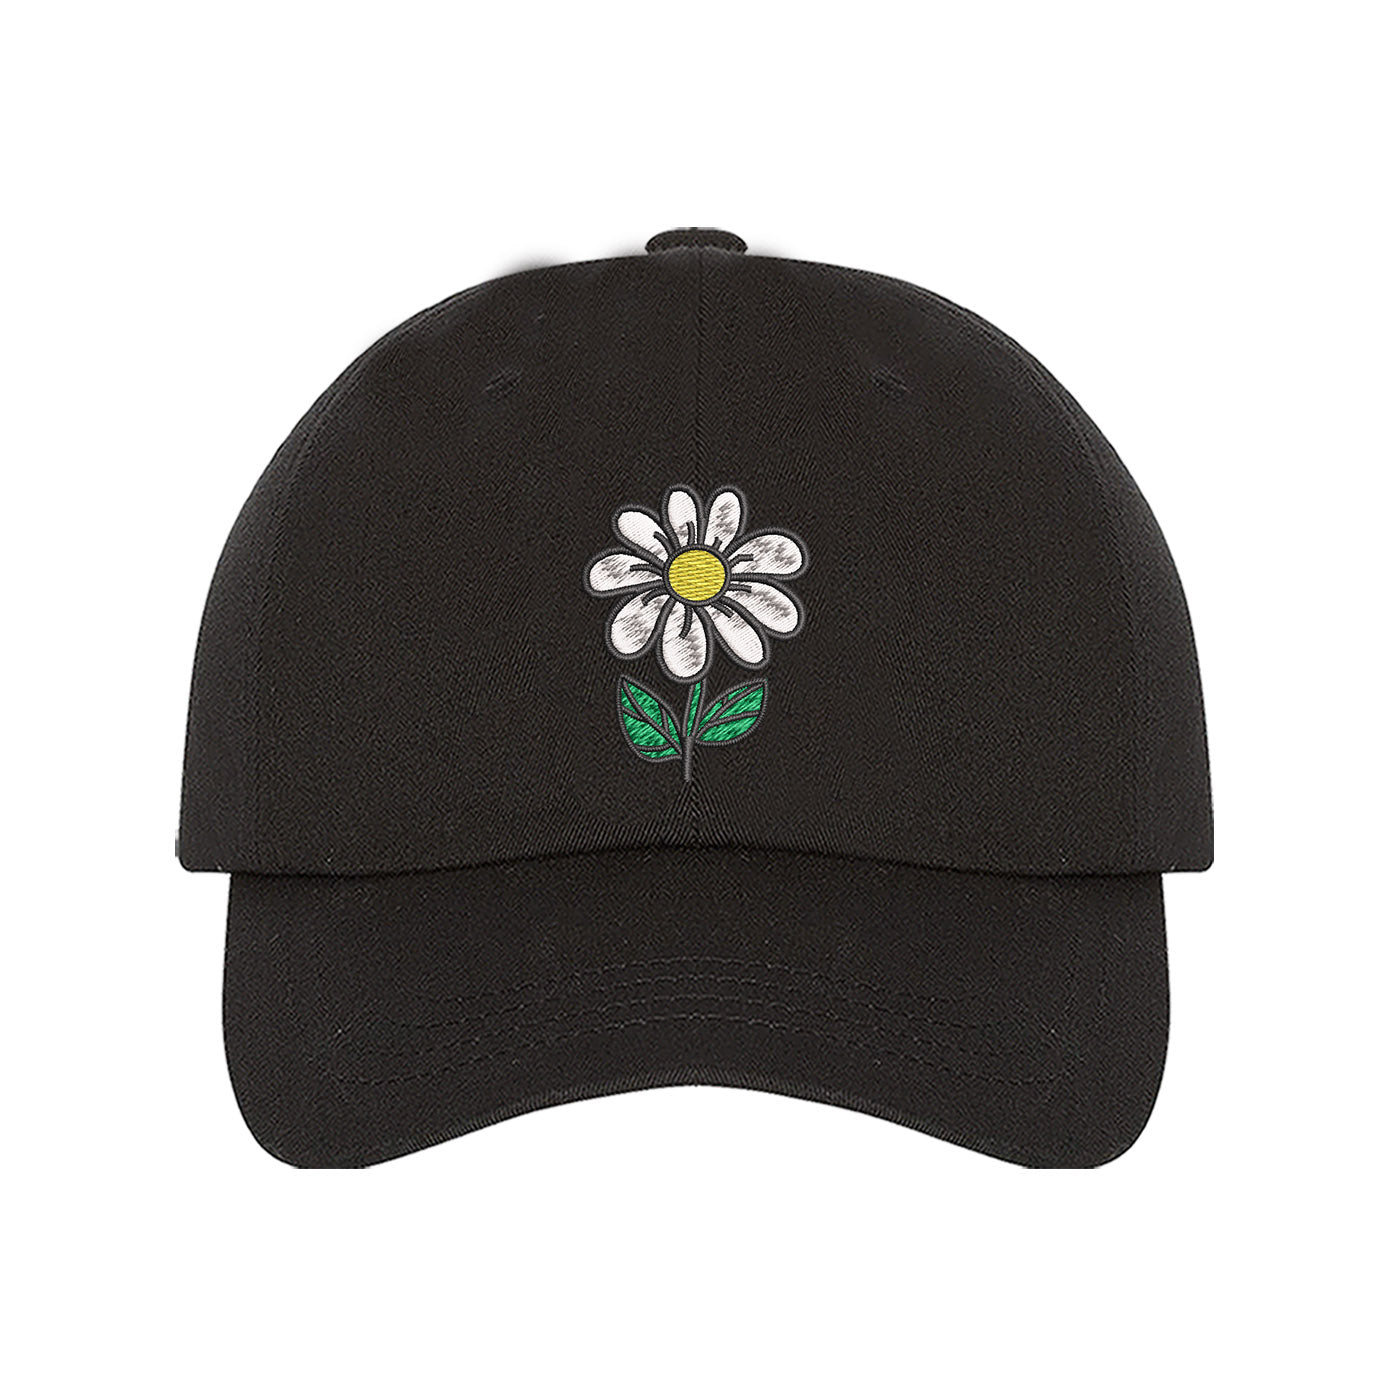 Black Baseball Cap embroidered with a daisy flower with stem - DSY Lifestyle